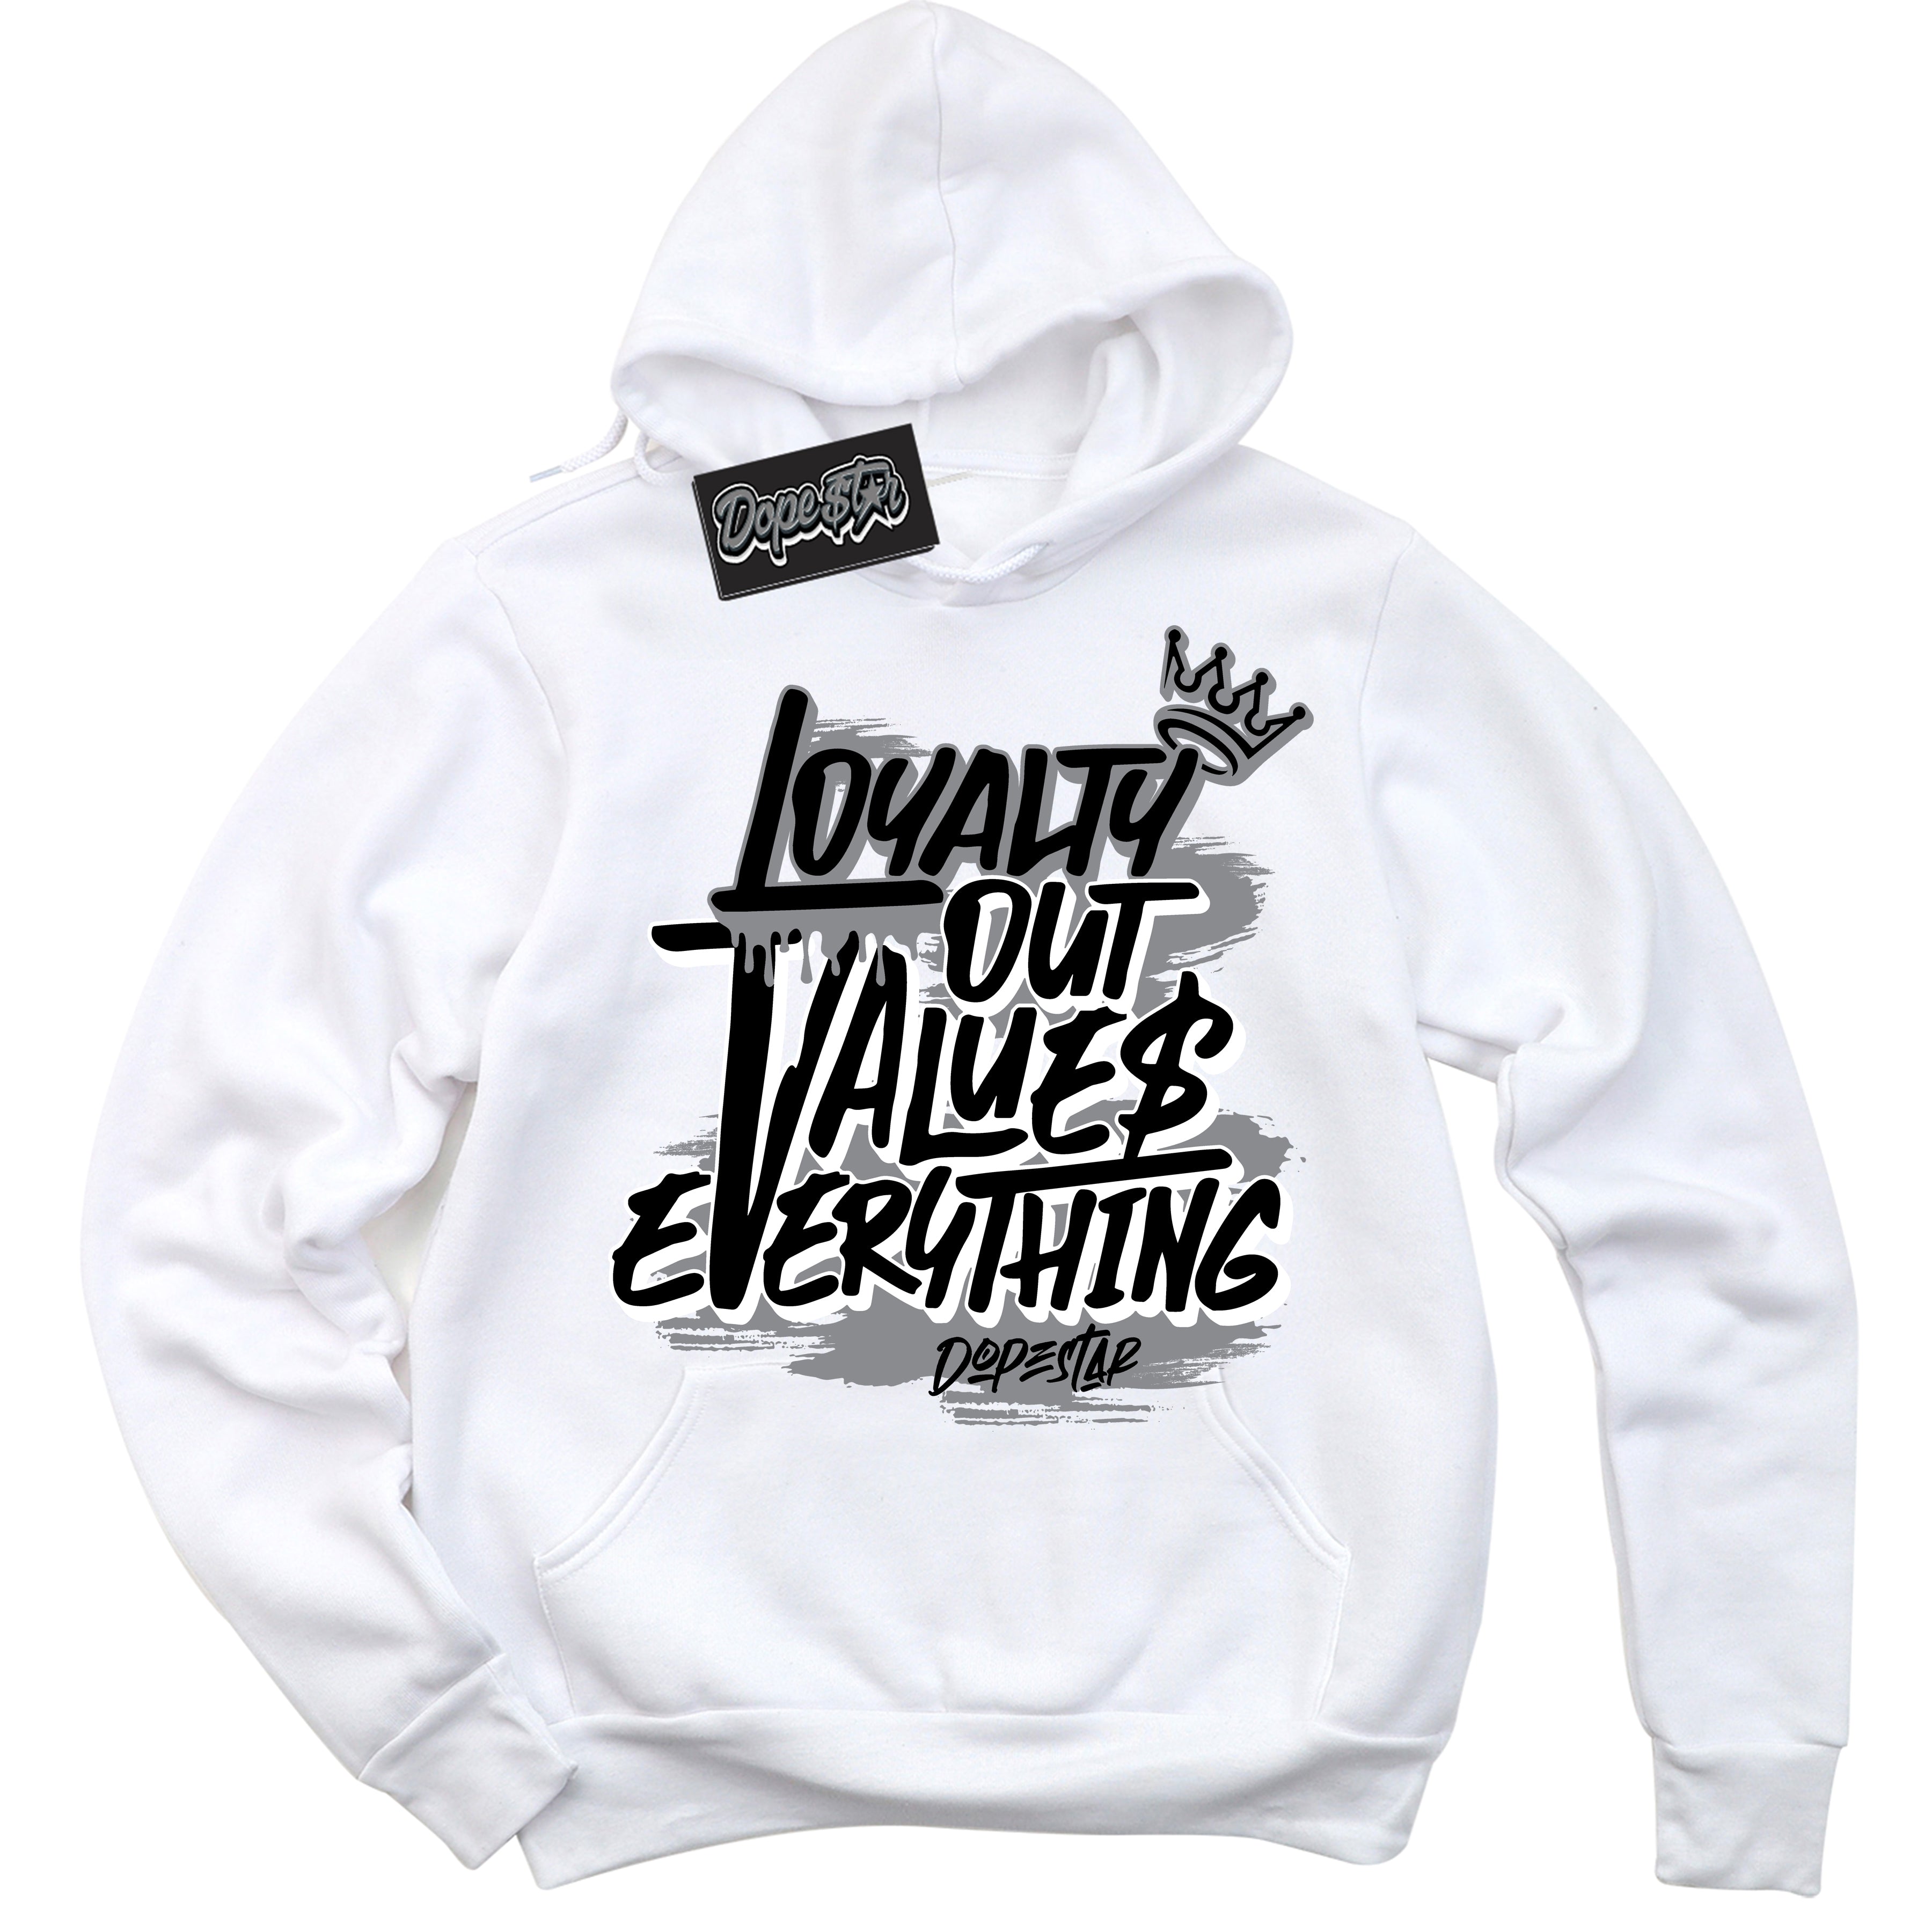 Cool White Hoodie with “ Loyalty Out Values Everything ”  design that Perfectly Matches SE Black Canvas 4s Sneakers.